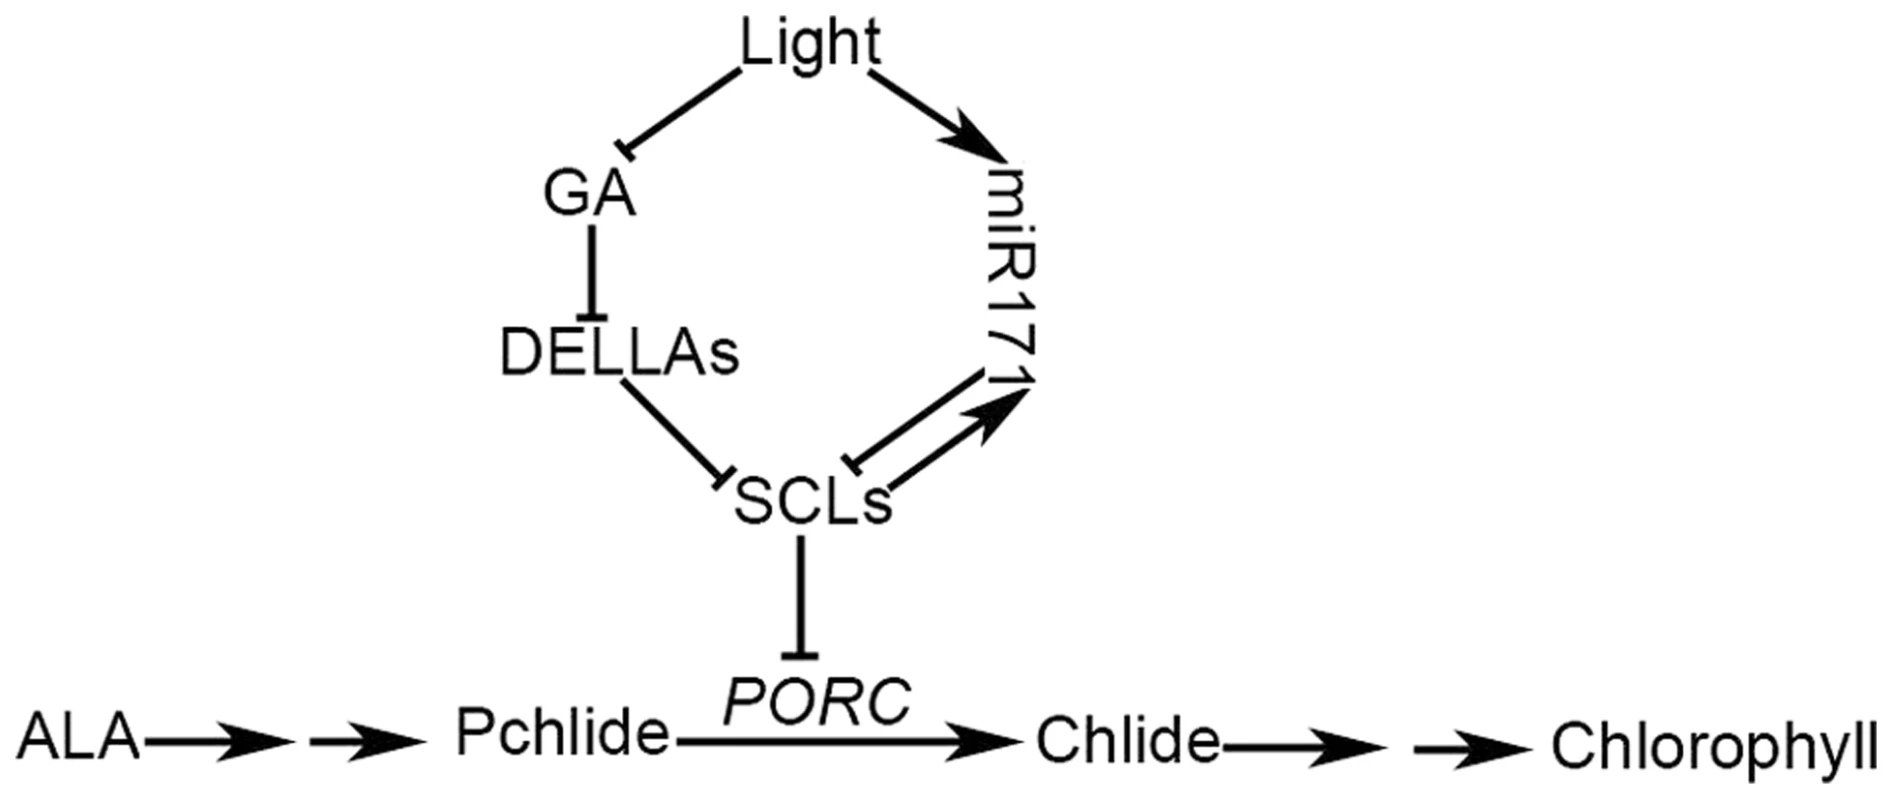 A working model of GA-regulated chlorophyll biosynthesis under the light condition.